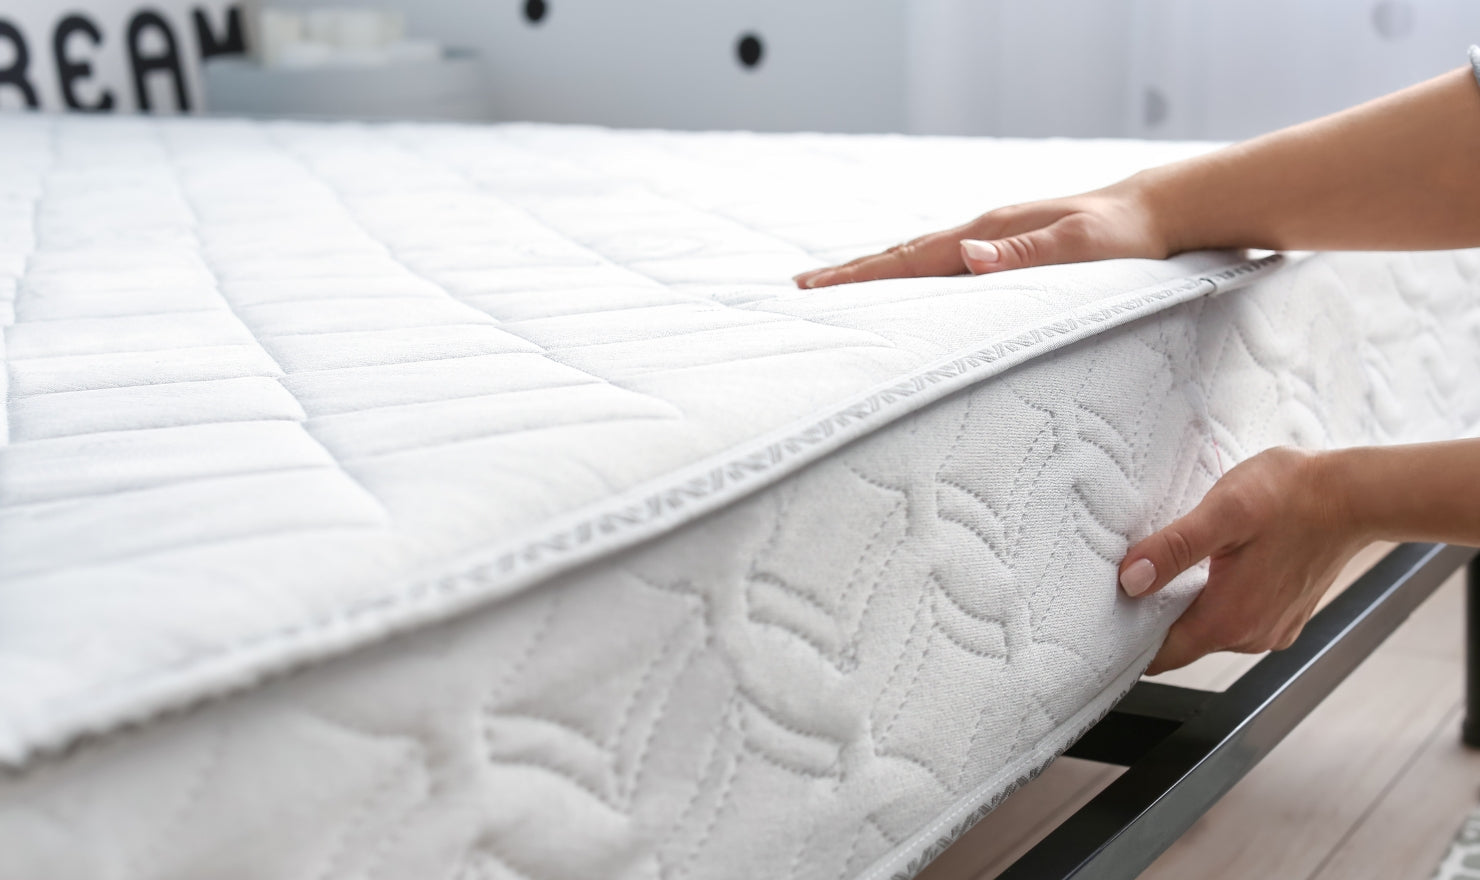 Revamp Your Bedtime Bliss The Necessary Mattress Upgrade